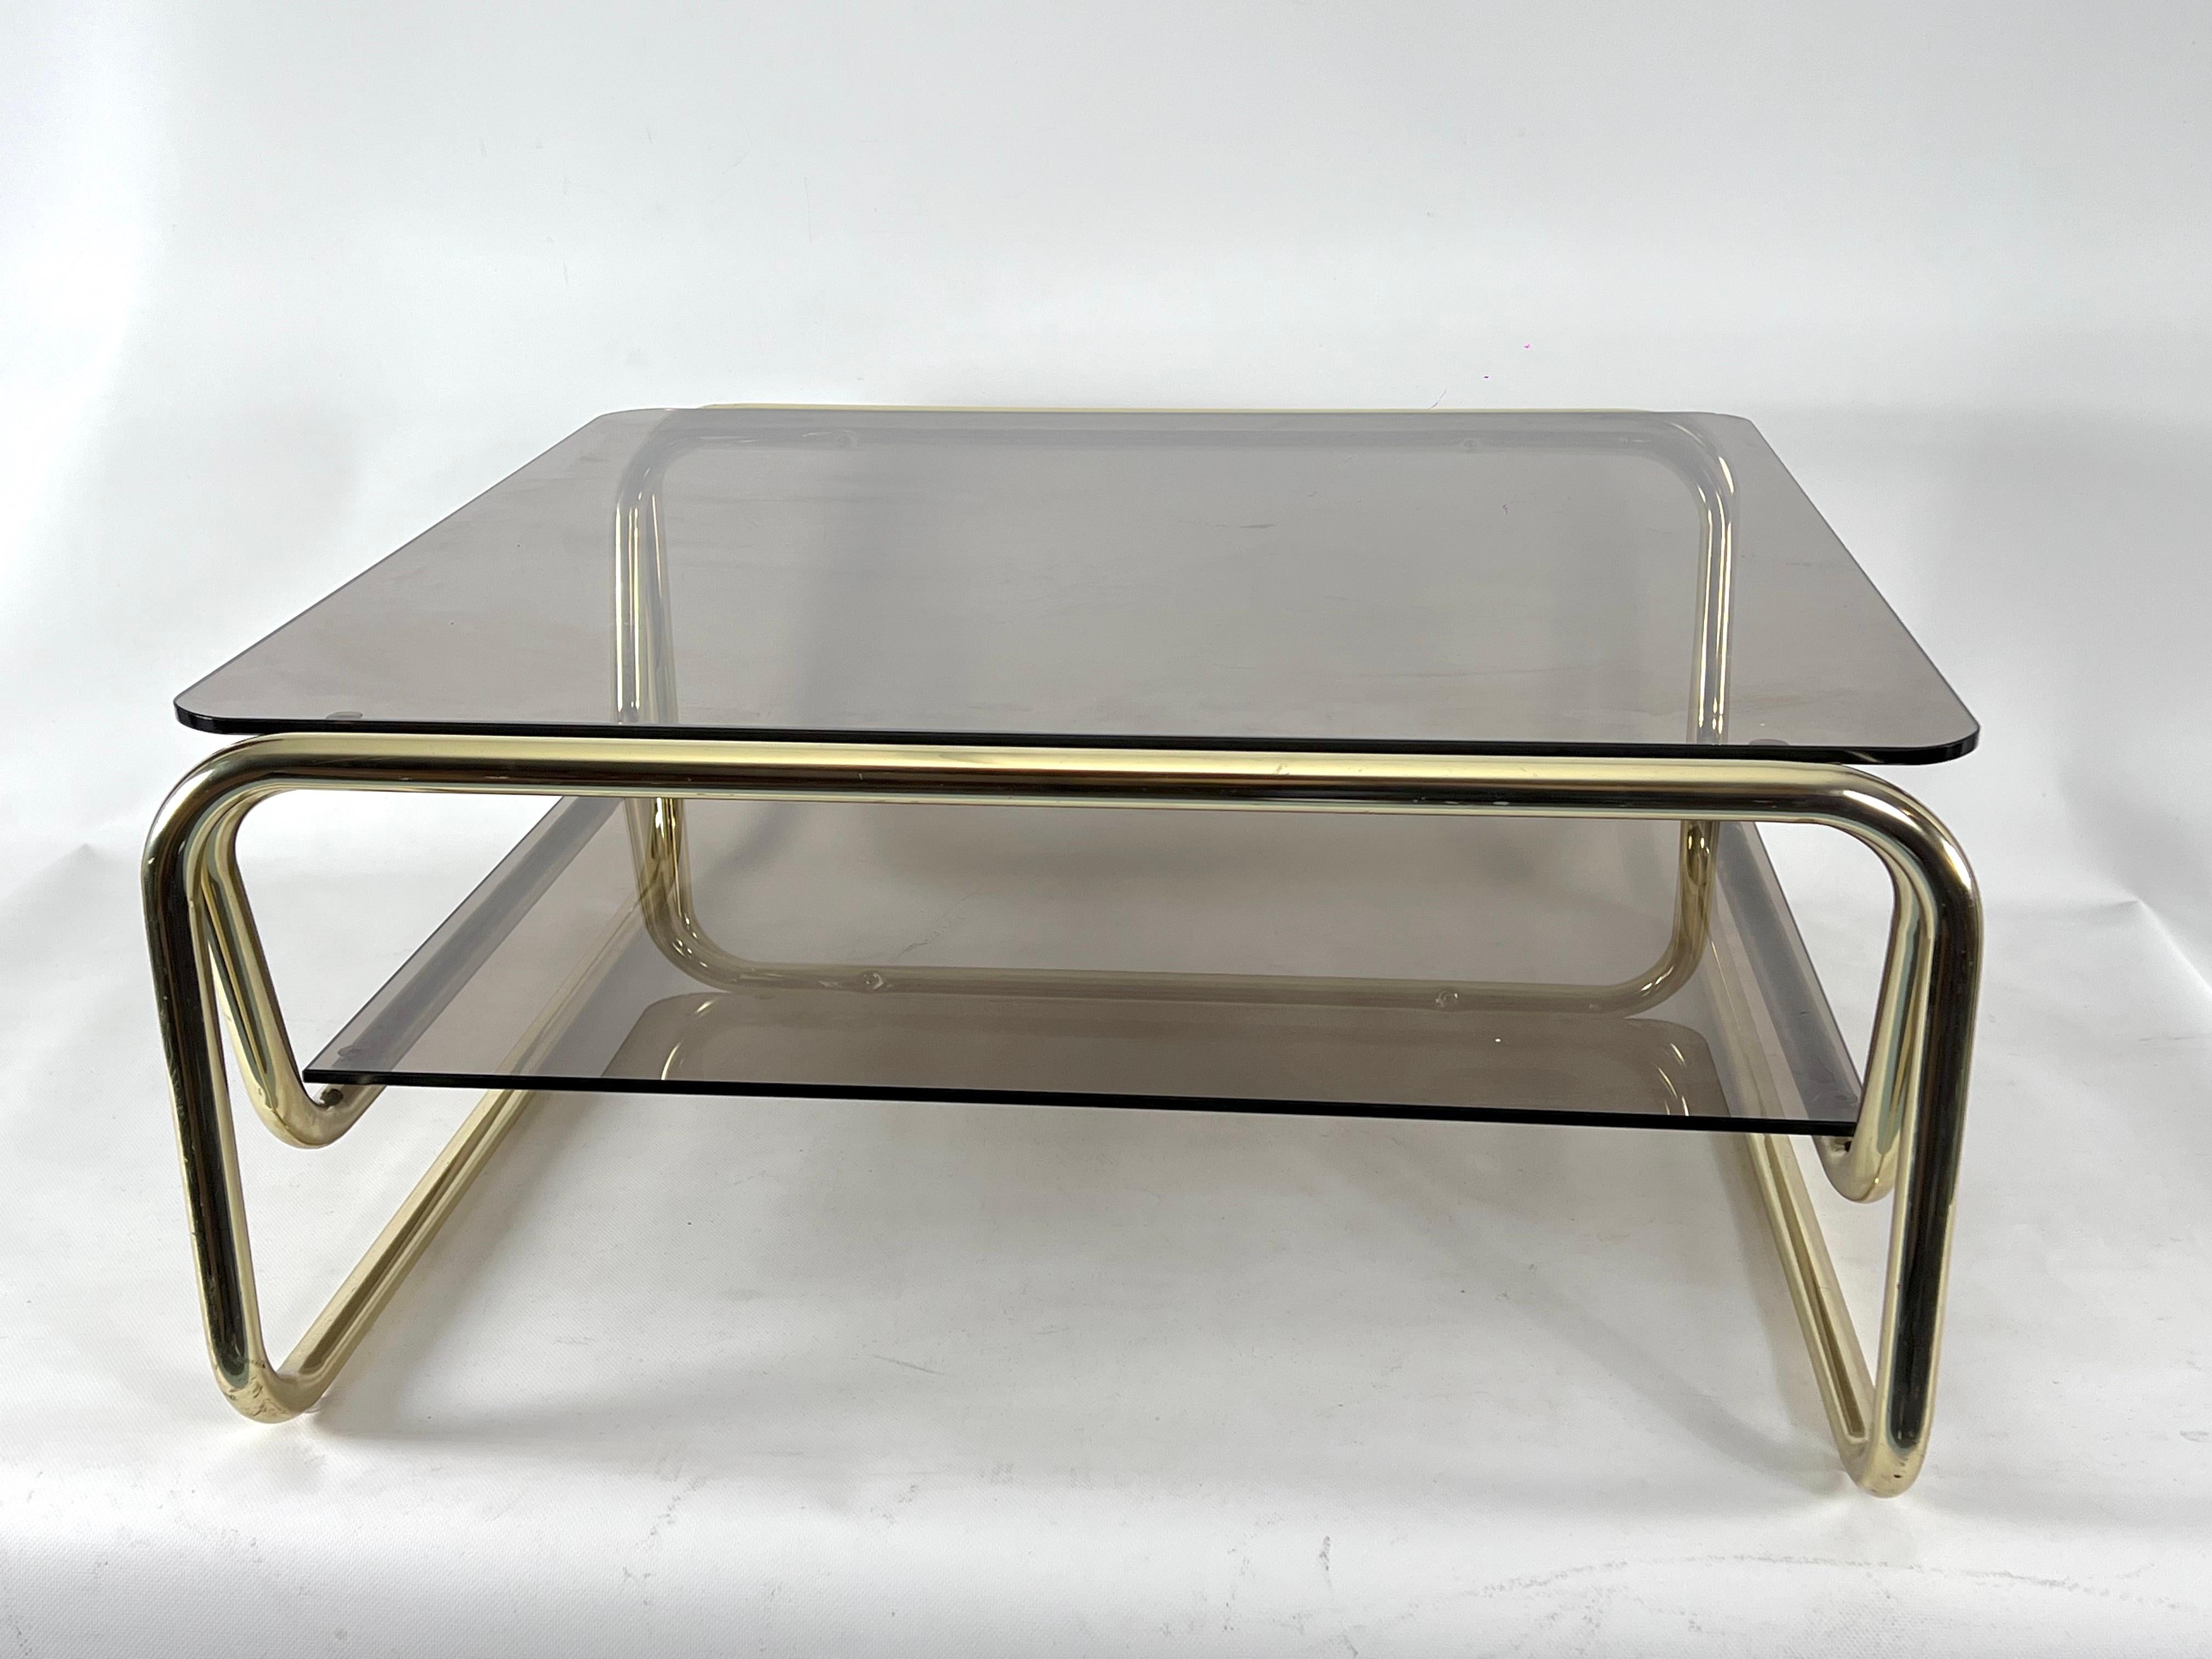 Excellent vintage condition with rare trace of age and use. No cracks or chips. Made from gilded metal and smoked glass

